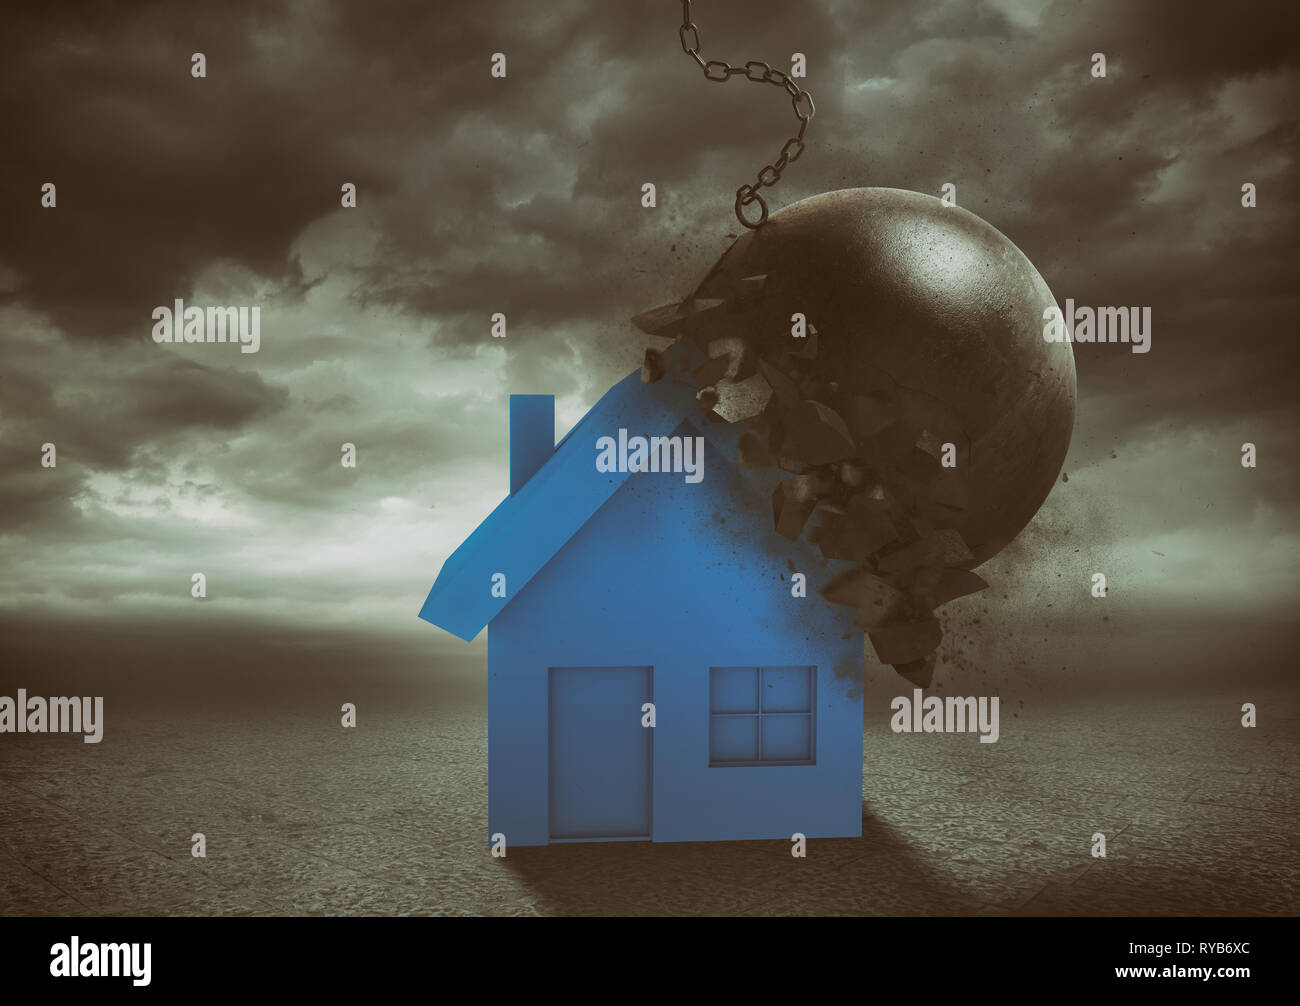 House resists the impact with a demolition ball. Concept of strength and indestructibility Stock Photo